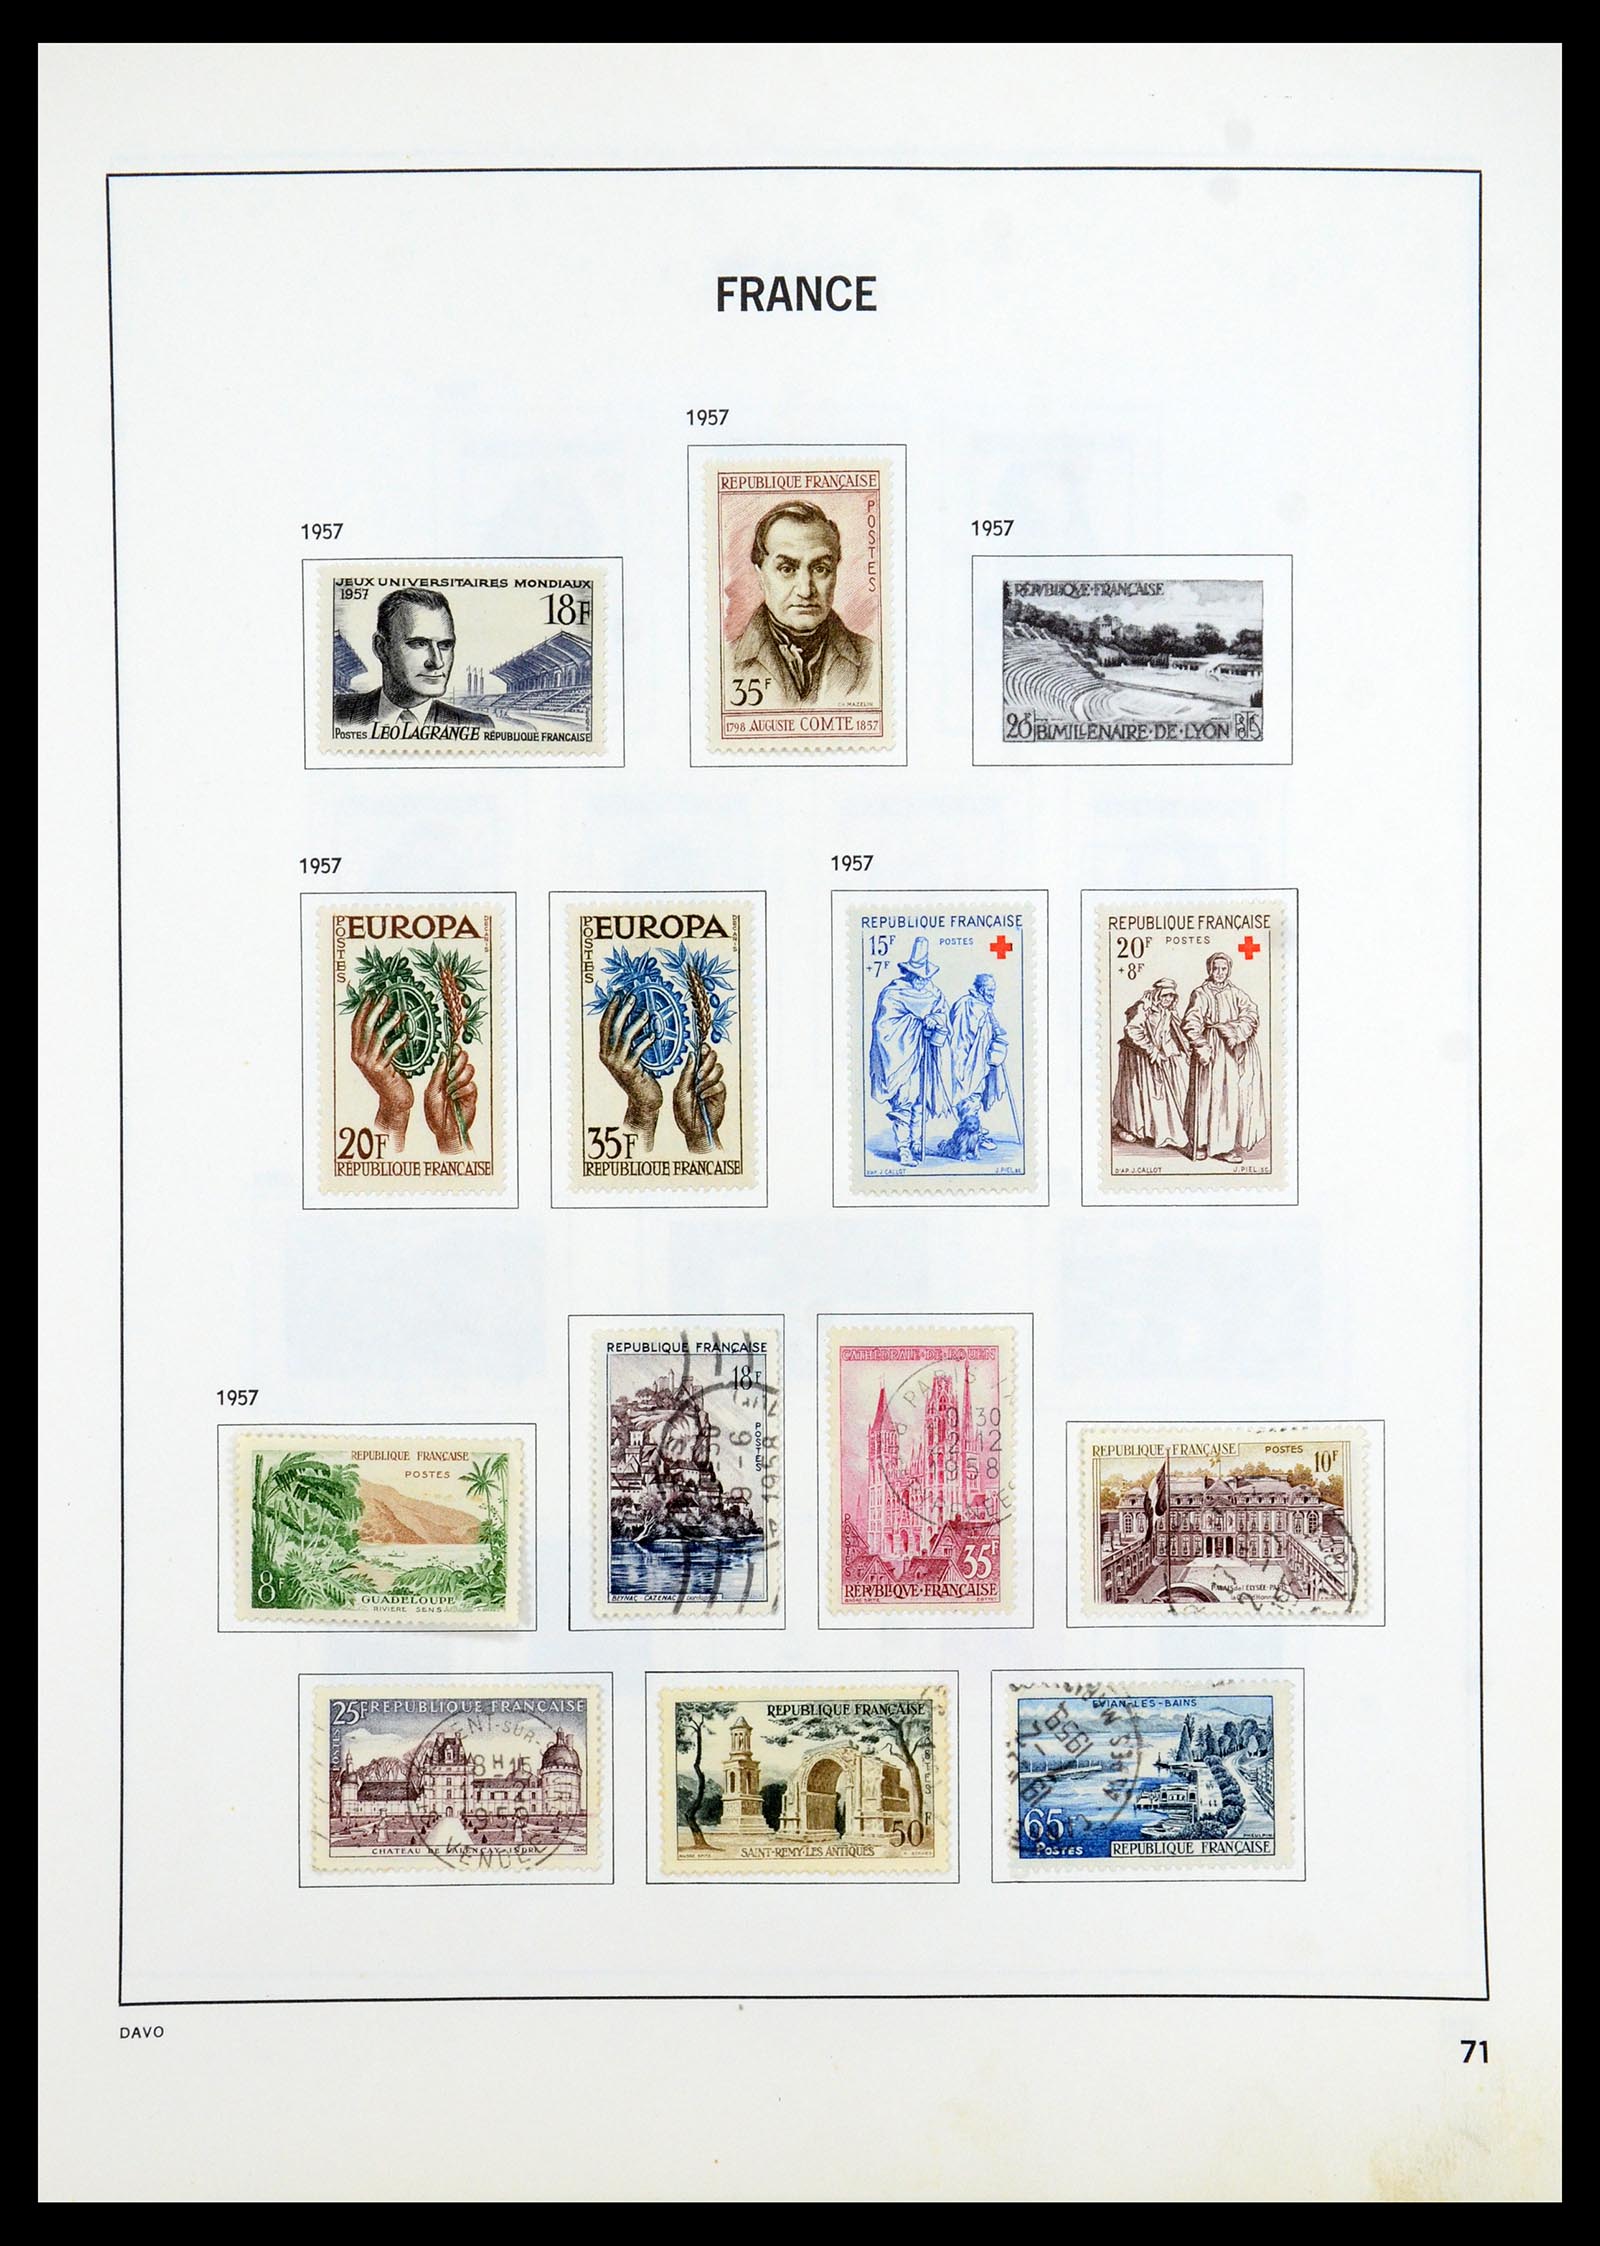 35533 072 - Stamp Collection 35533 France 1849-2003.